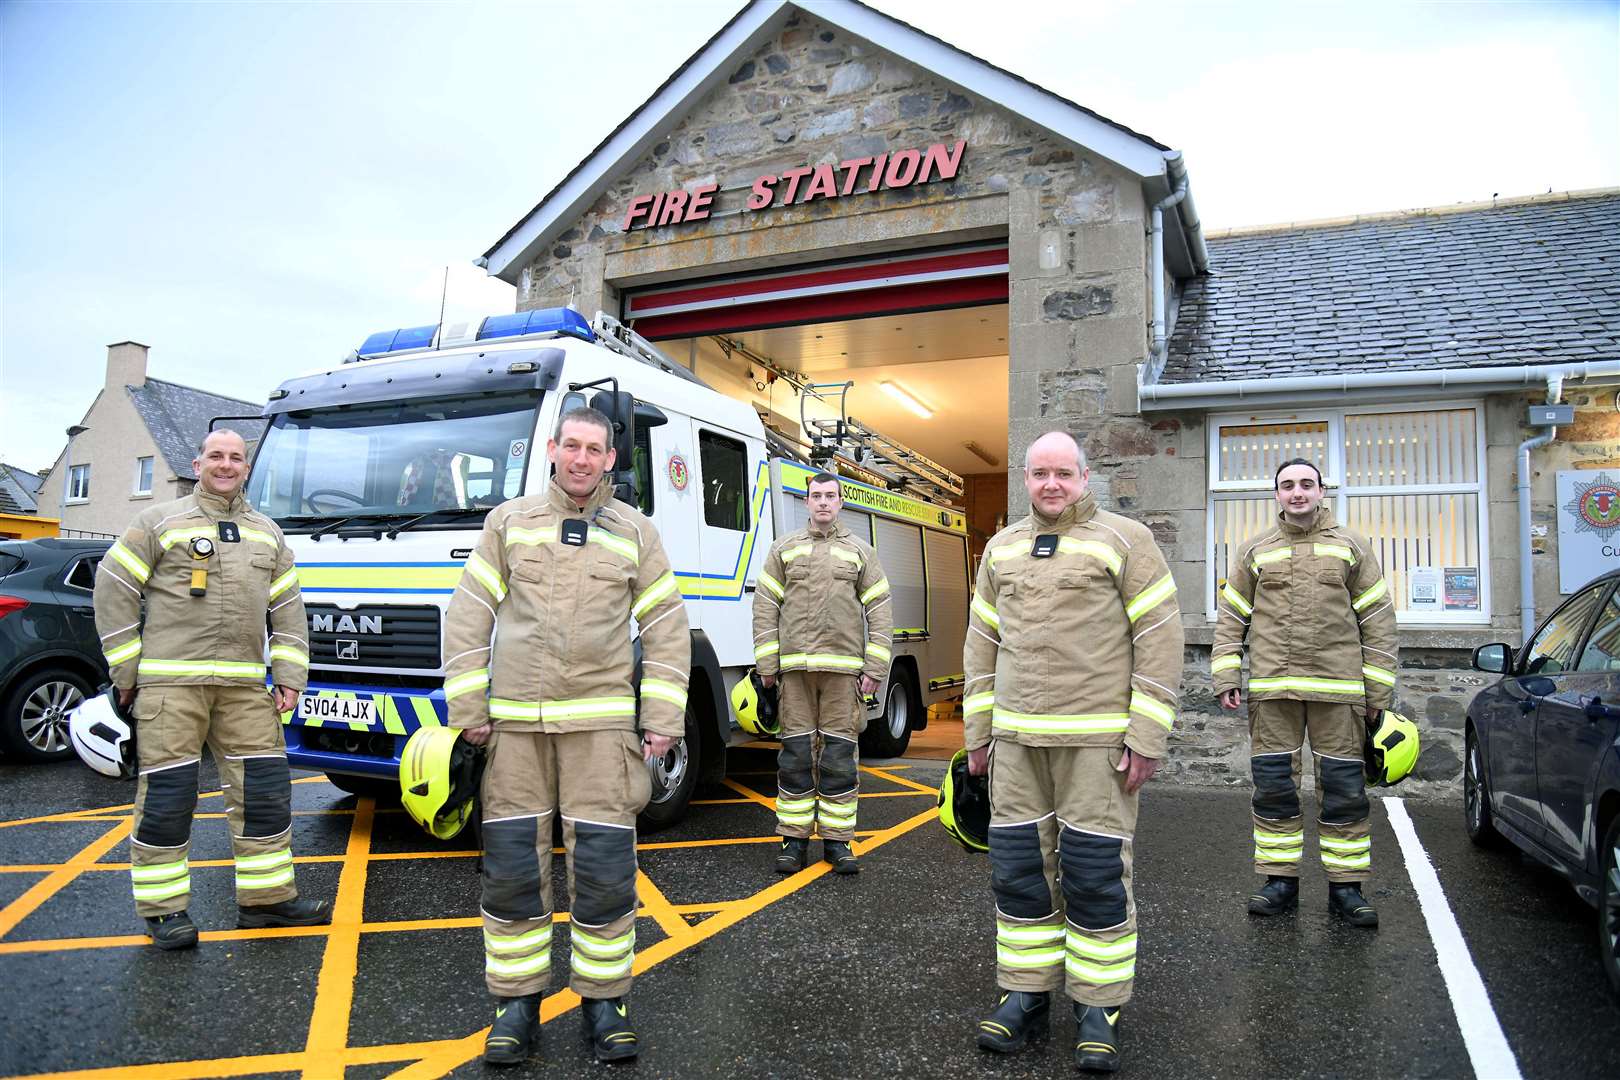 The retained team at Cullen fire station have raised over £1600 for charity thanks to their Christmas street collection.